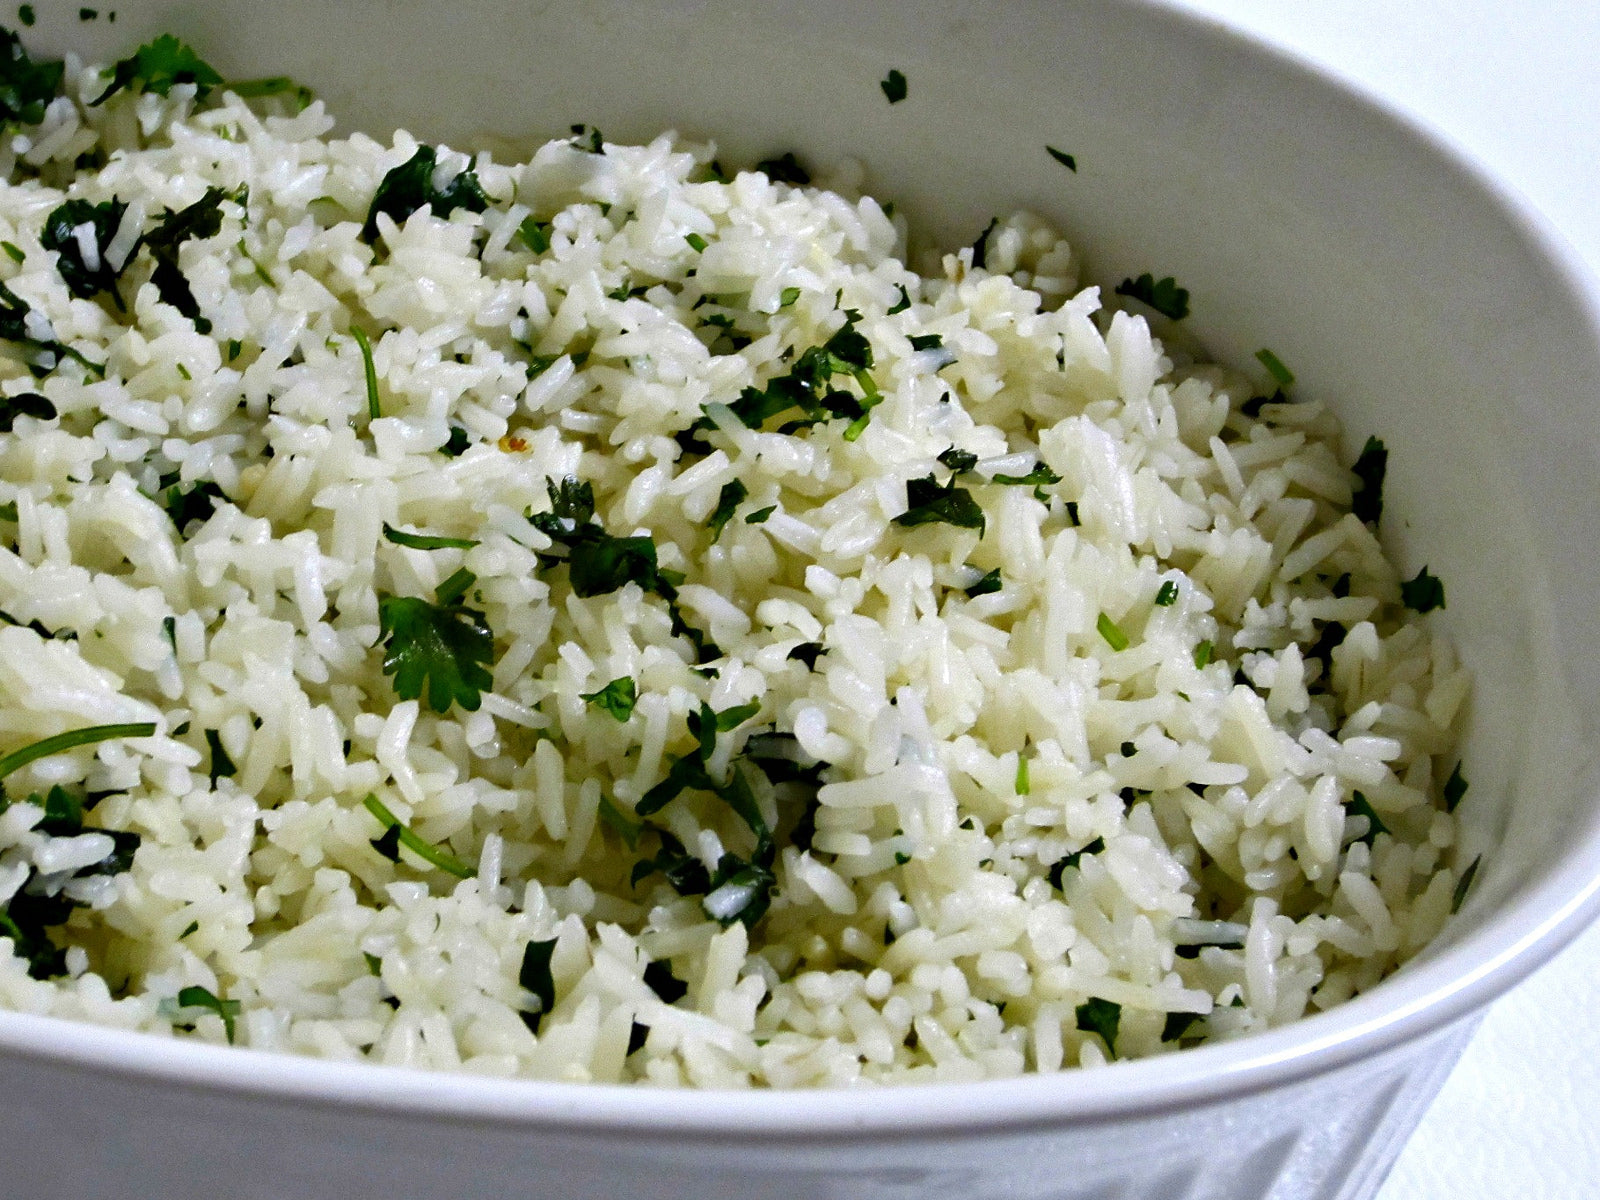 Make Chipotle-Style Citrus Rice in VitaClay!